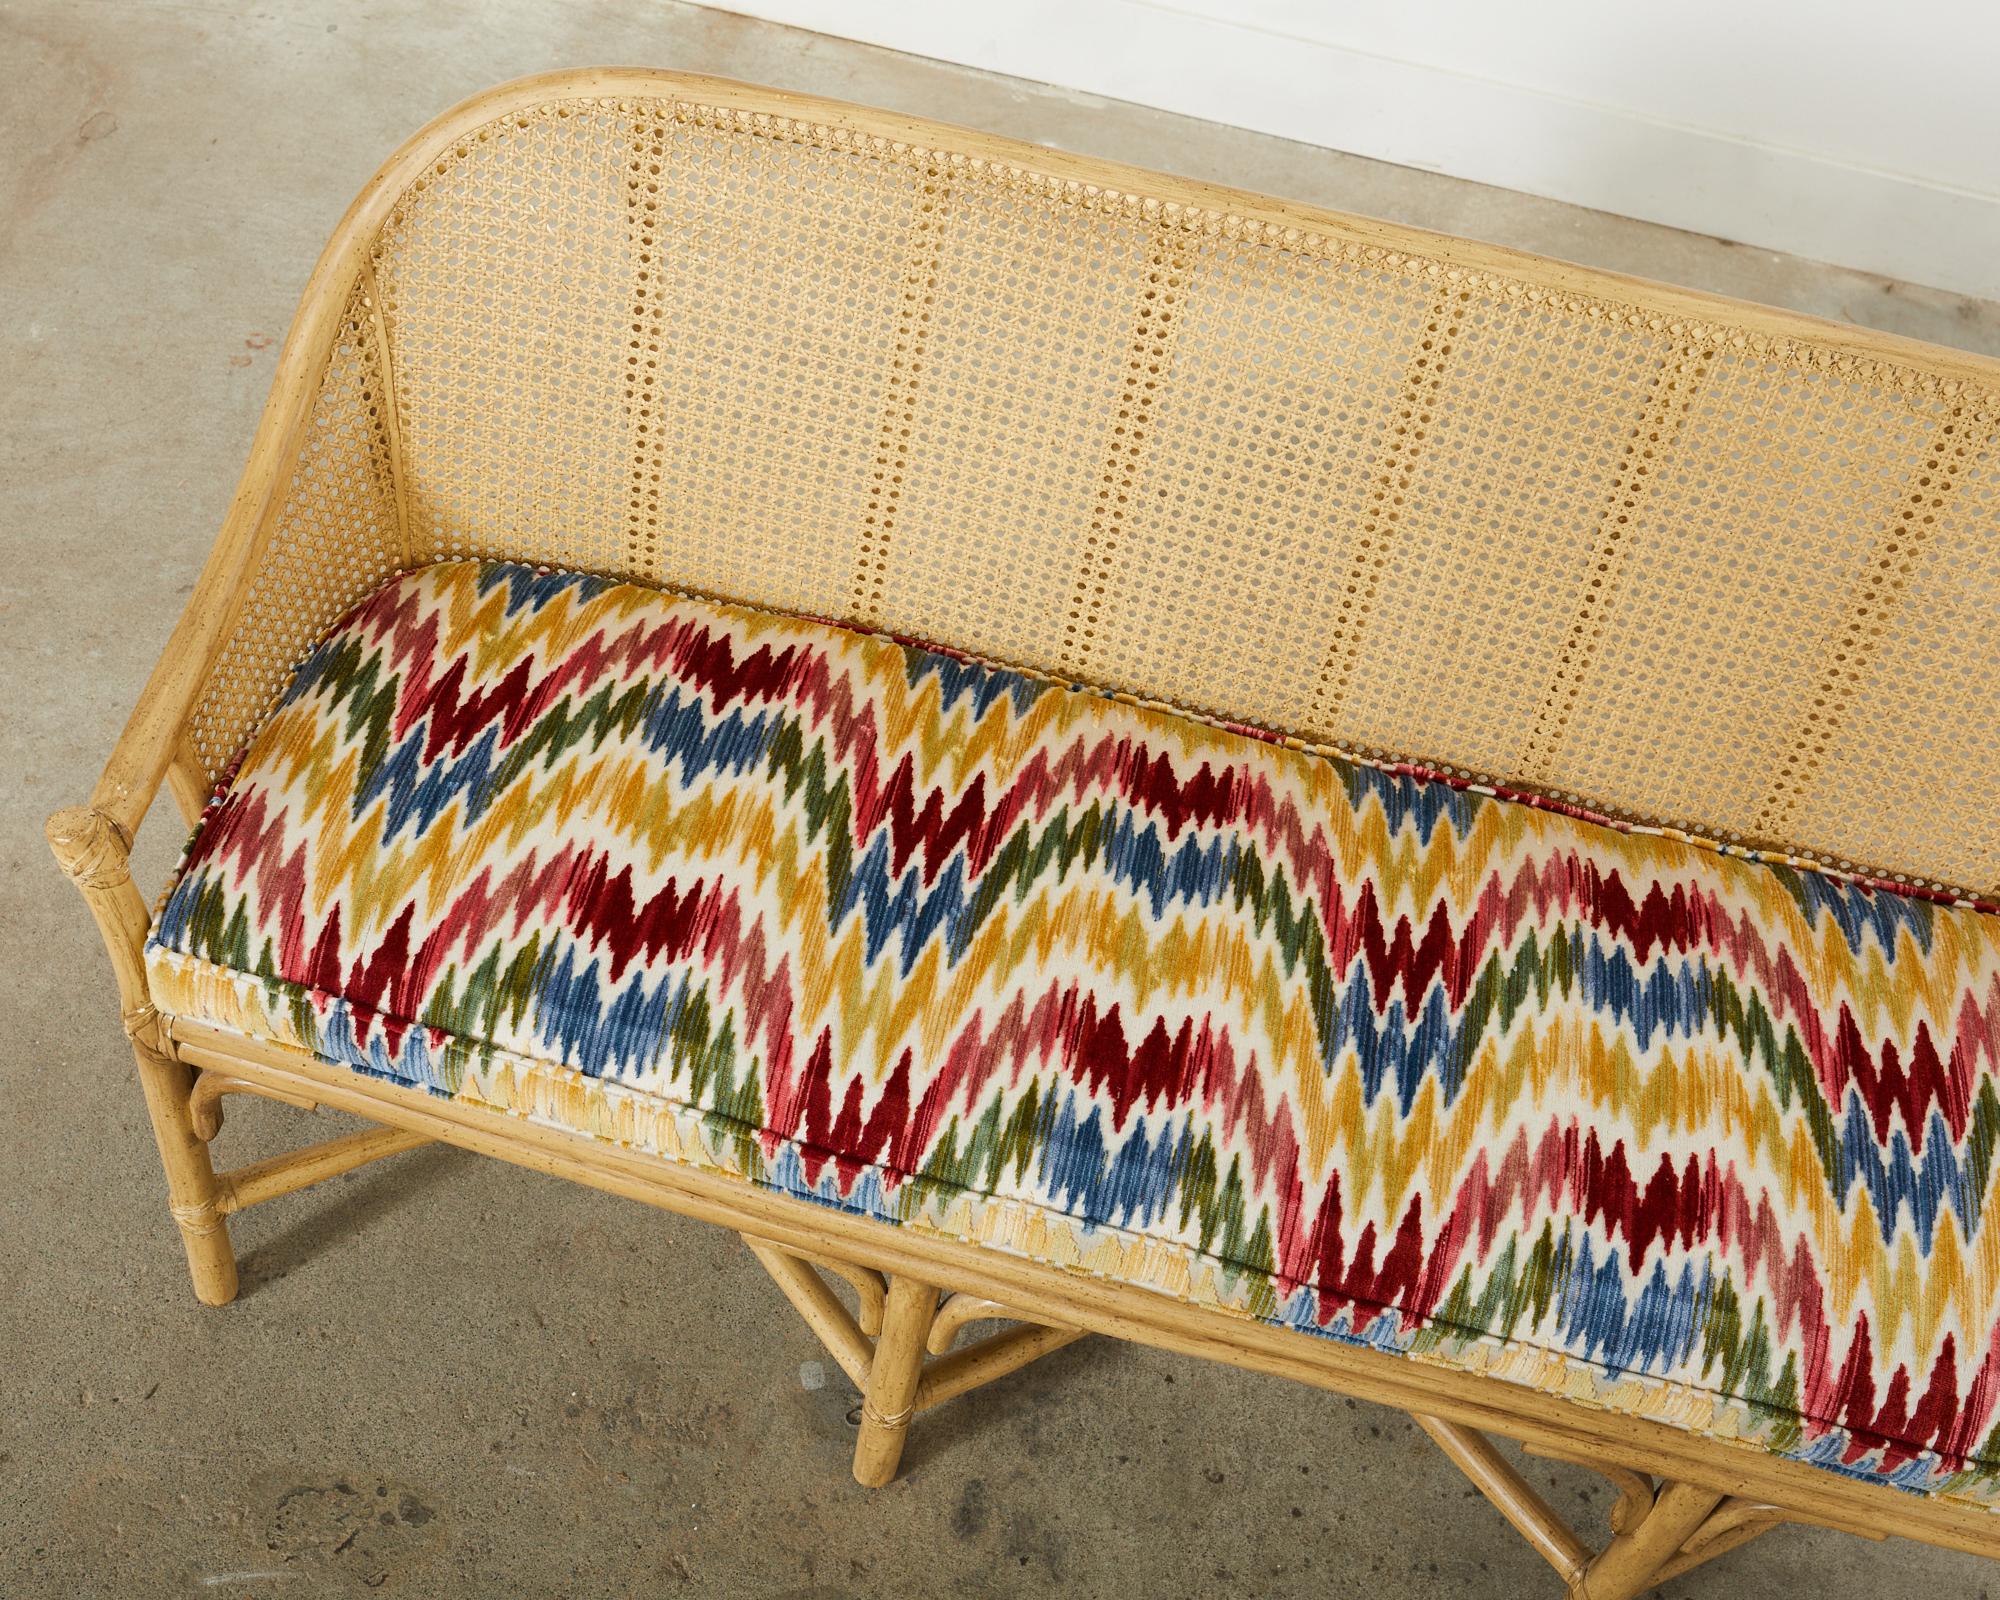 McGuire Midcentury Organic Modern Rattan Cane Settee In Good Condition For Sale In Rio Vista, CA